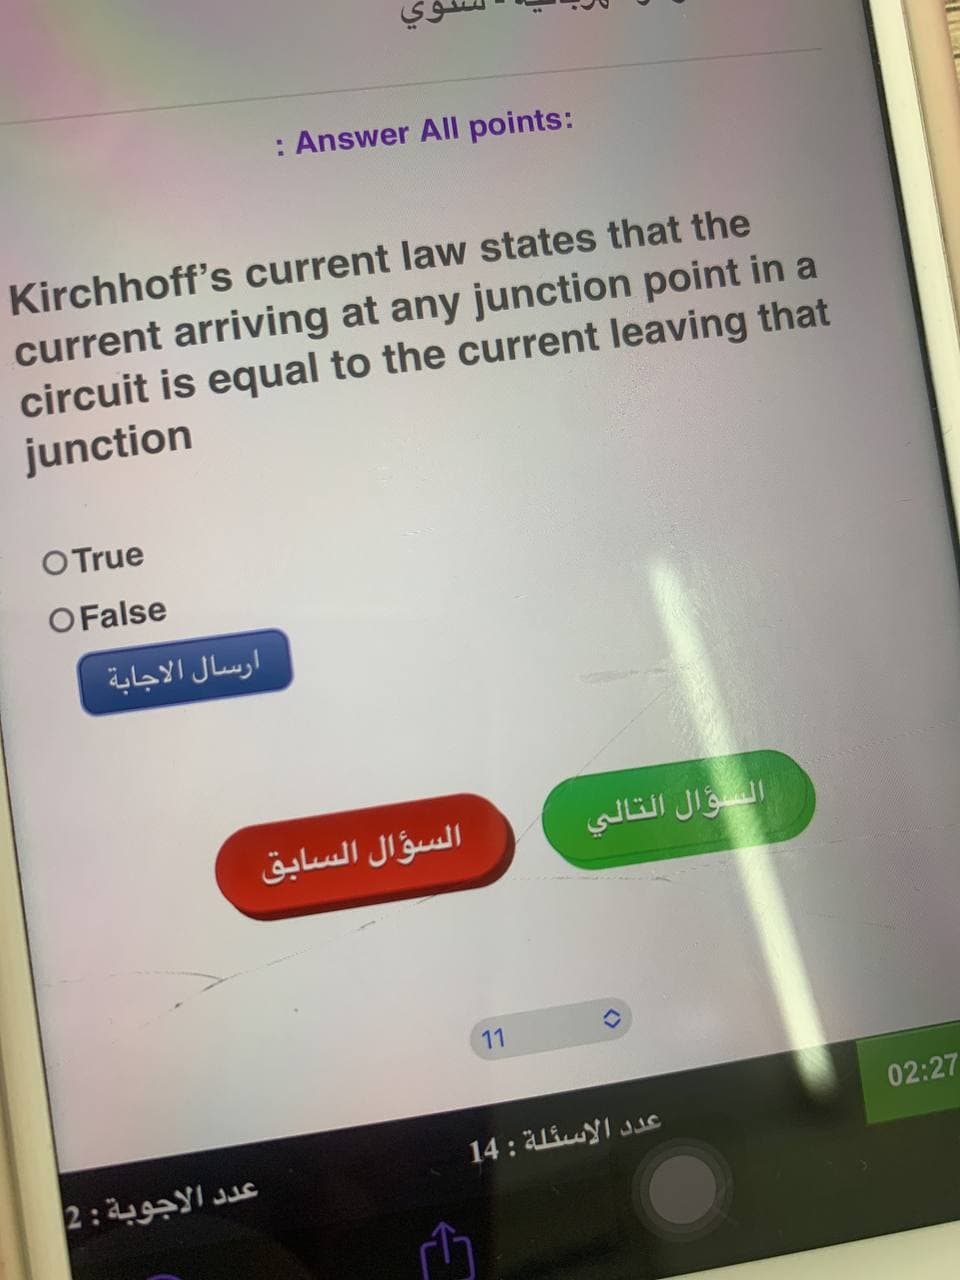 : Answer All points:
Kirchhoff's current law states that the
current arriving at any junction point in a
circuit is equal to the current leaving that
junction
O True
O False
ارسال الاجابة
عدد الاجوبة : 2
السؤال السابق
11
دام
السؤال التالي
عدد الاسئلة : 14
02:27